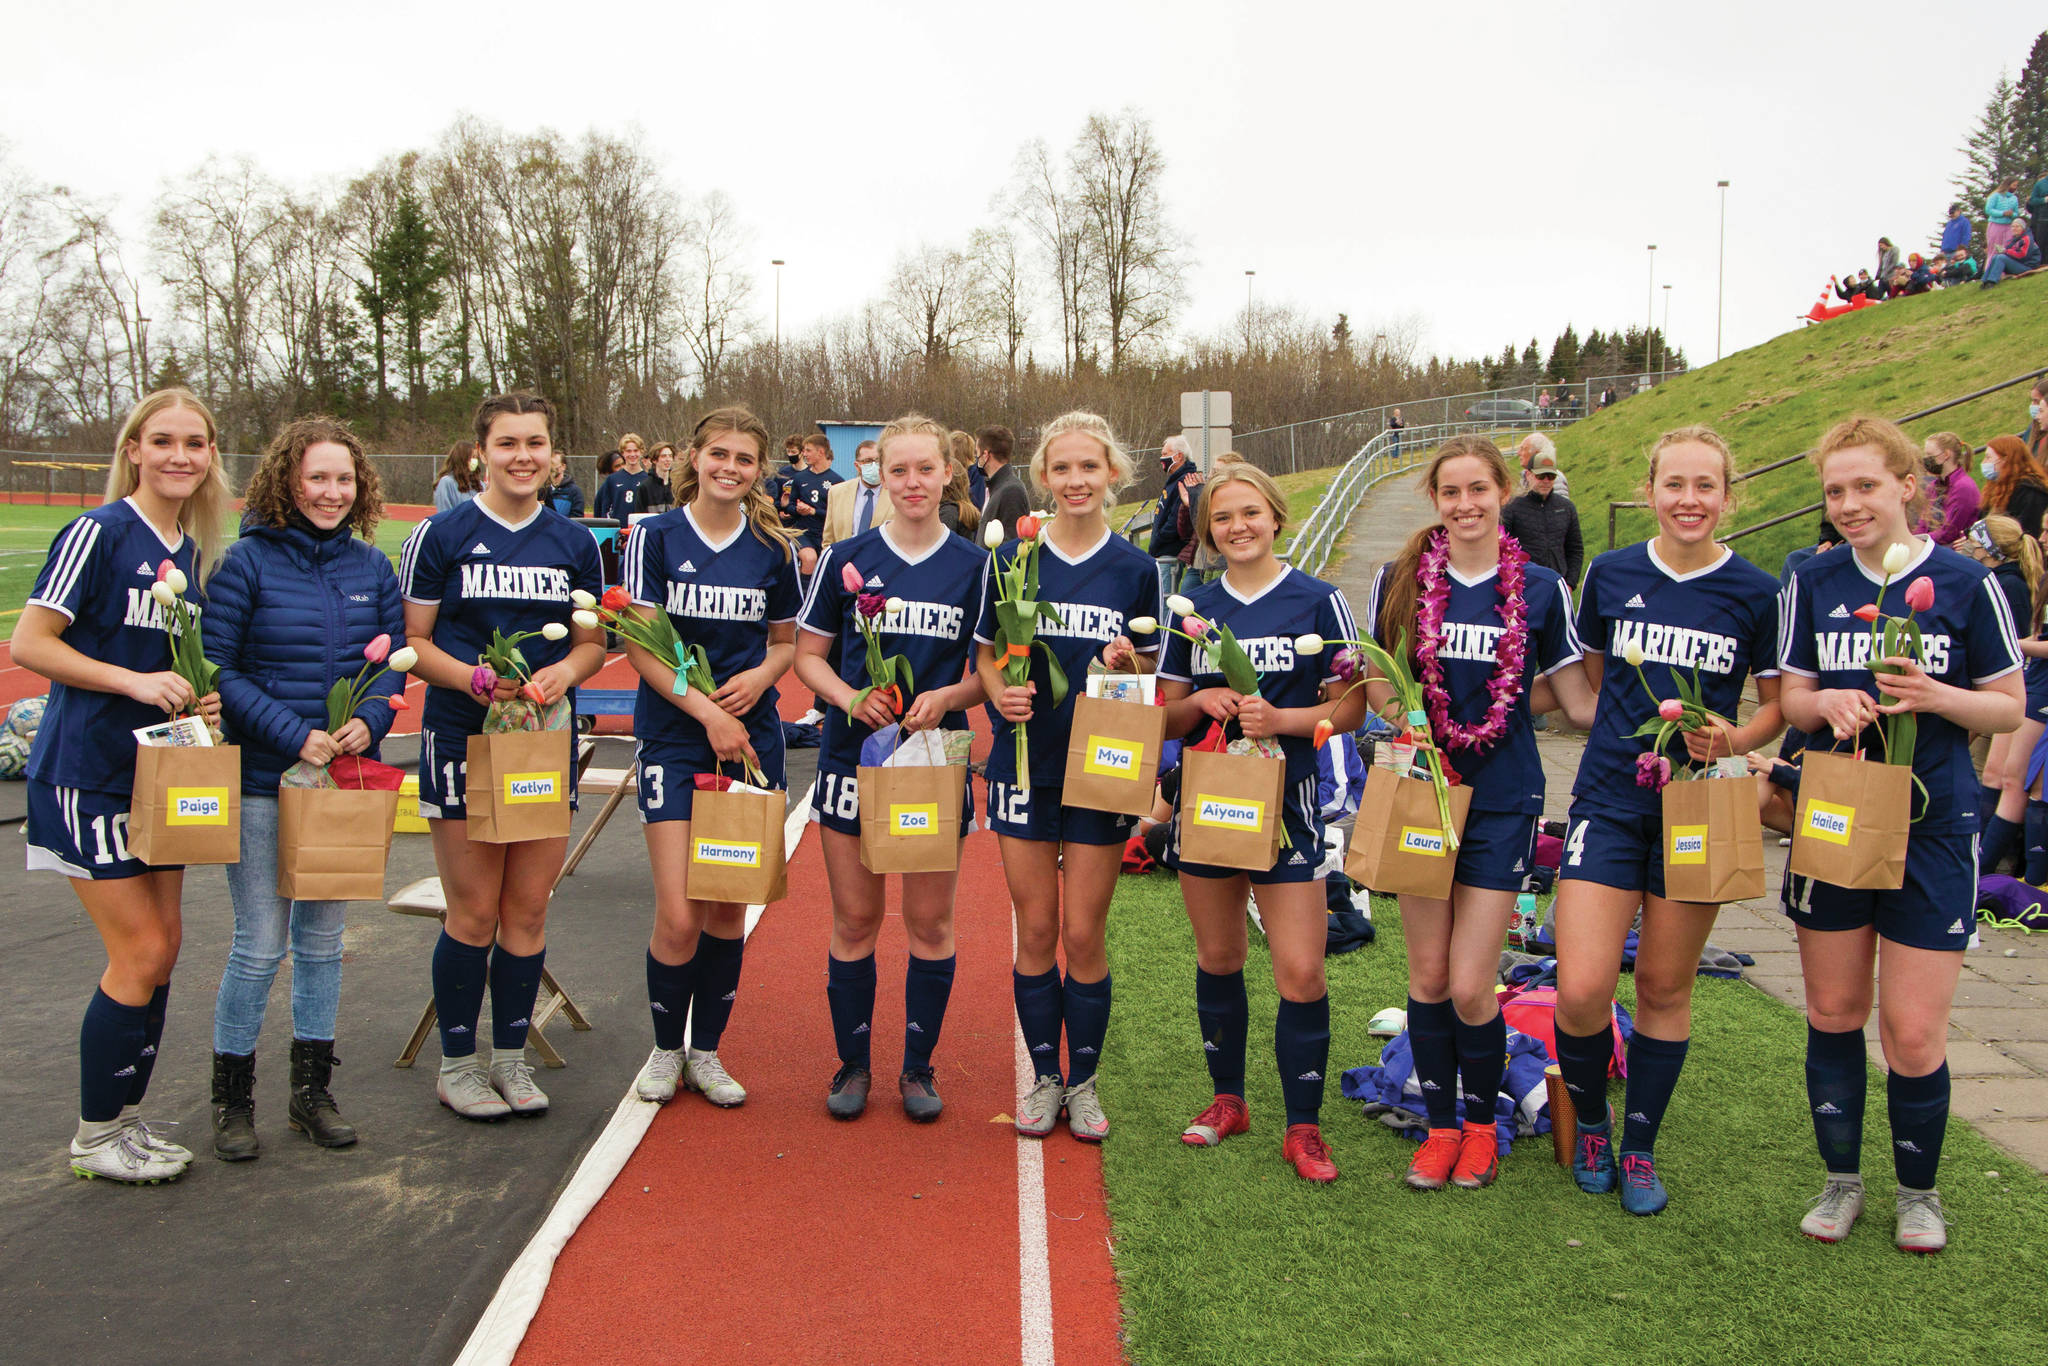 The seniors on the Homer High School girls soccer team were recognized in a ceremony May 14. Pictured left to right are Paige Jones, Katelyn Engebretsen, Katlyn Vogl, Harmony Davidson, Zoe Stonorov, Mya Houglum, Aiyana Cline, Laura Inama, Jessica Sonnen and Hailee Alexander.